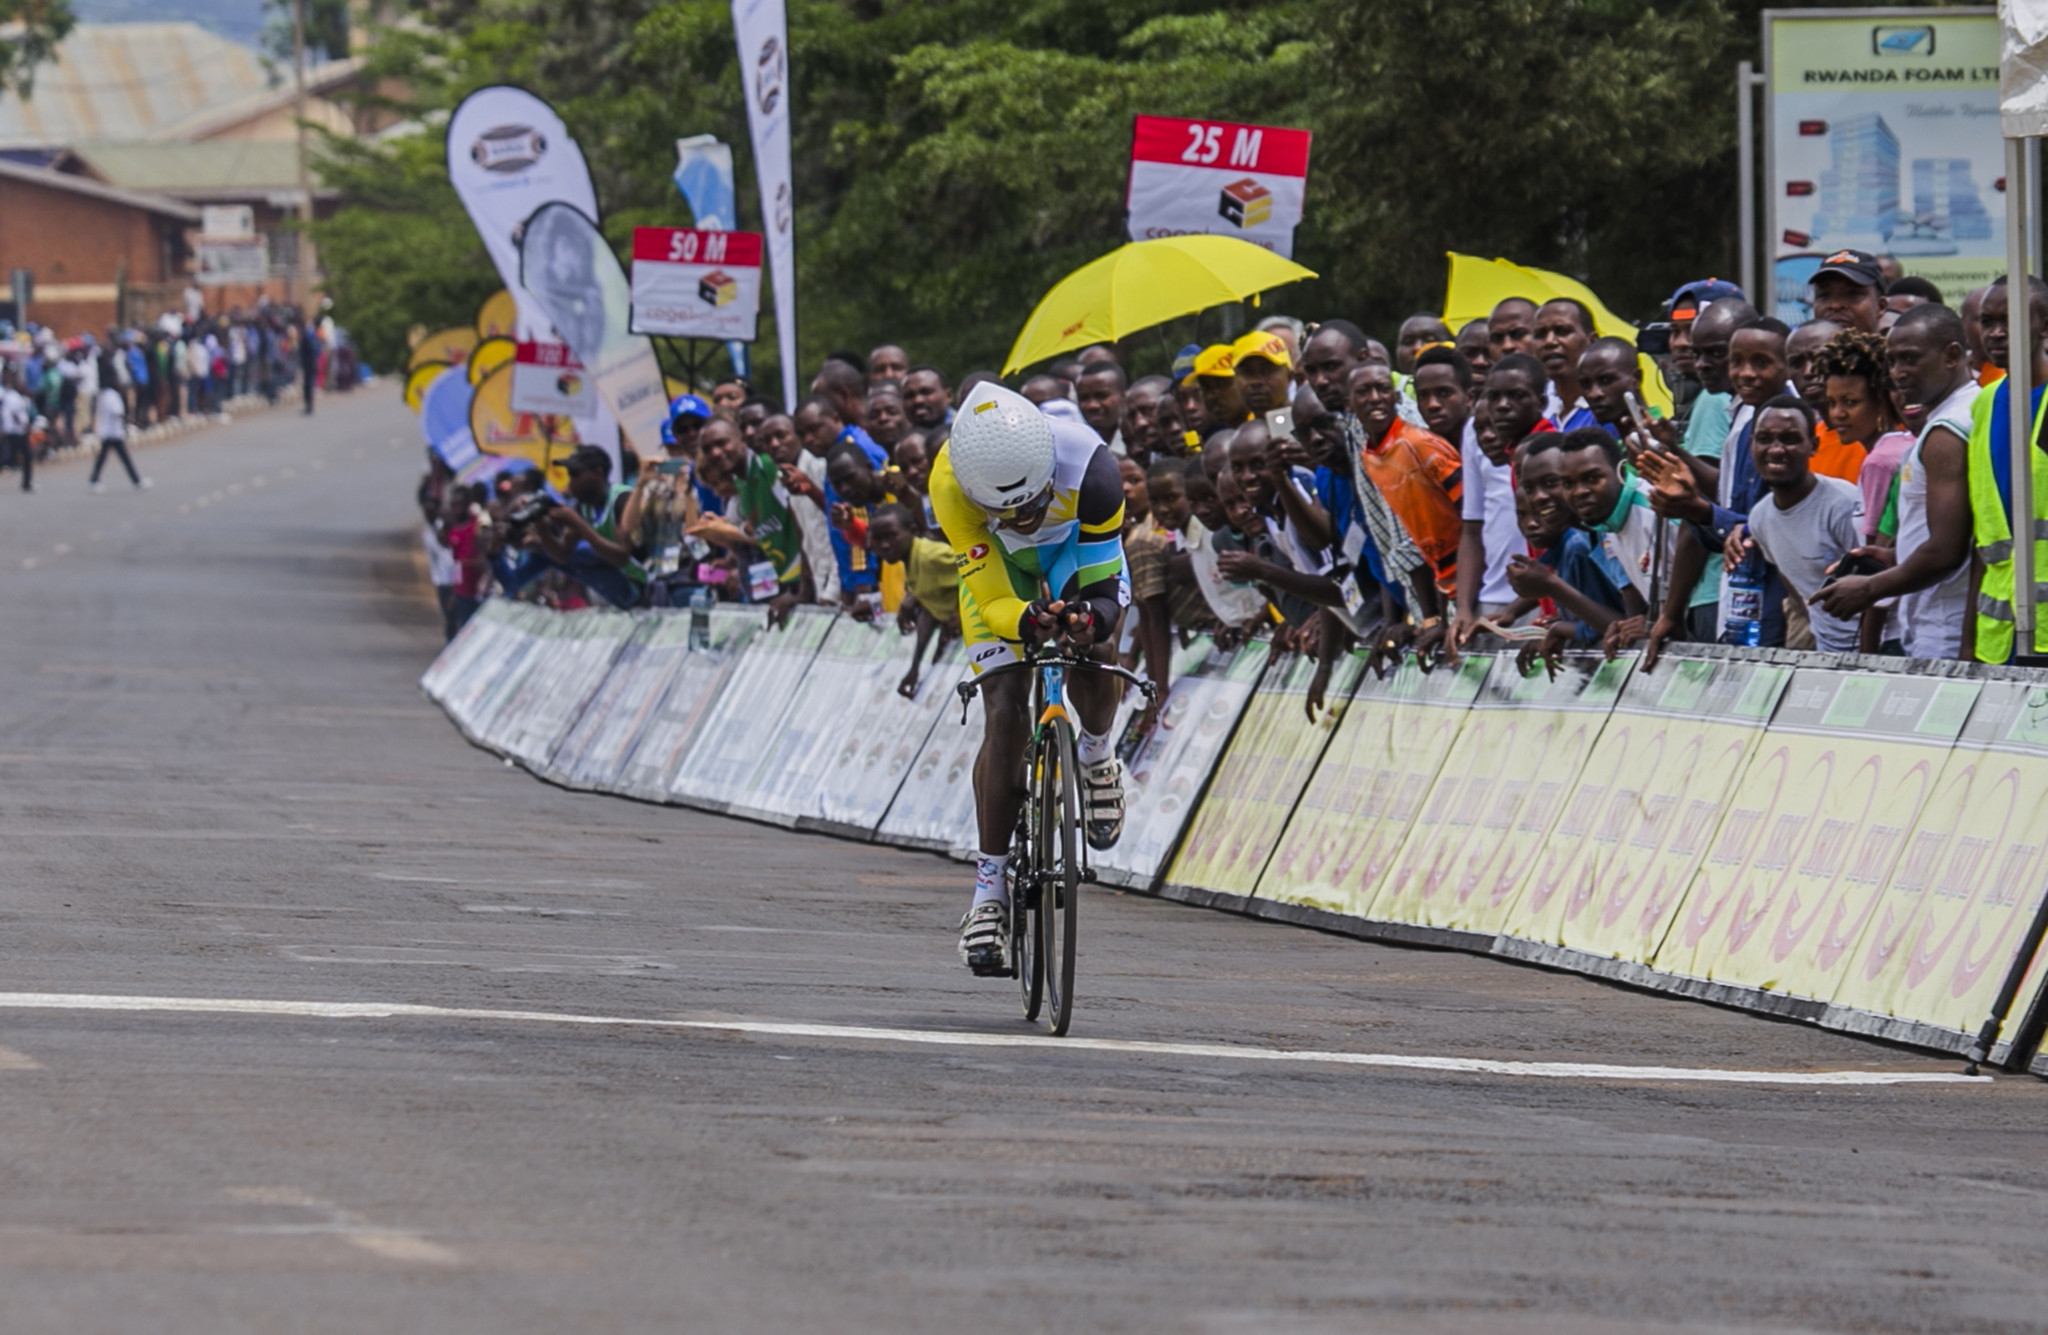 Tour of Rwanda in Kigali draws in large crowds as the sport continues to grow in the African nation ©Getty Images